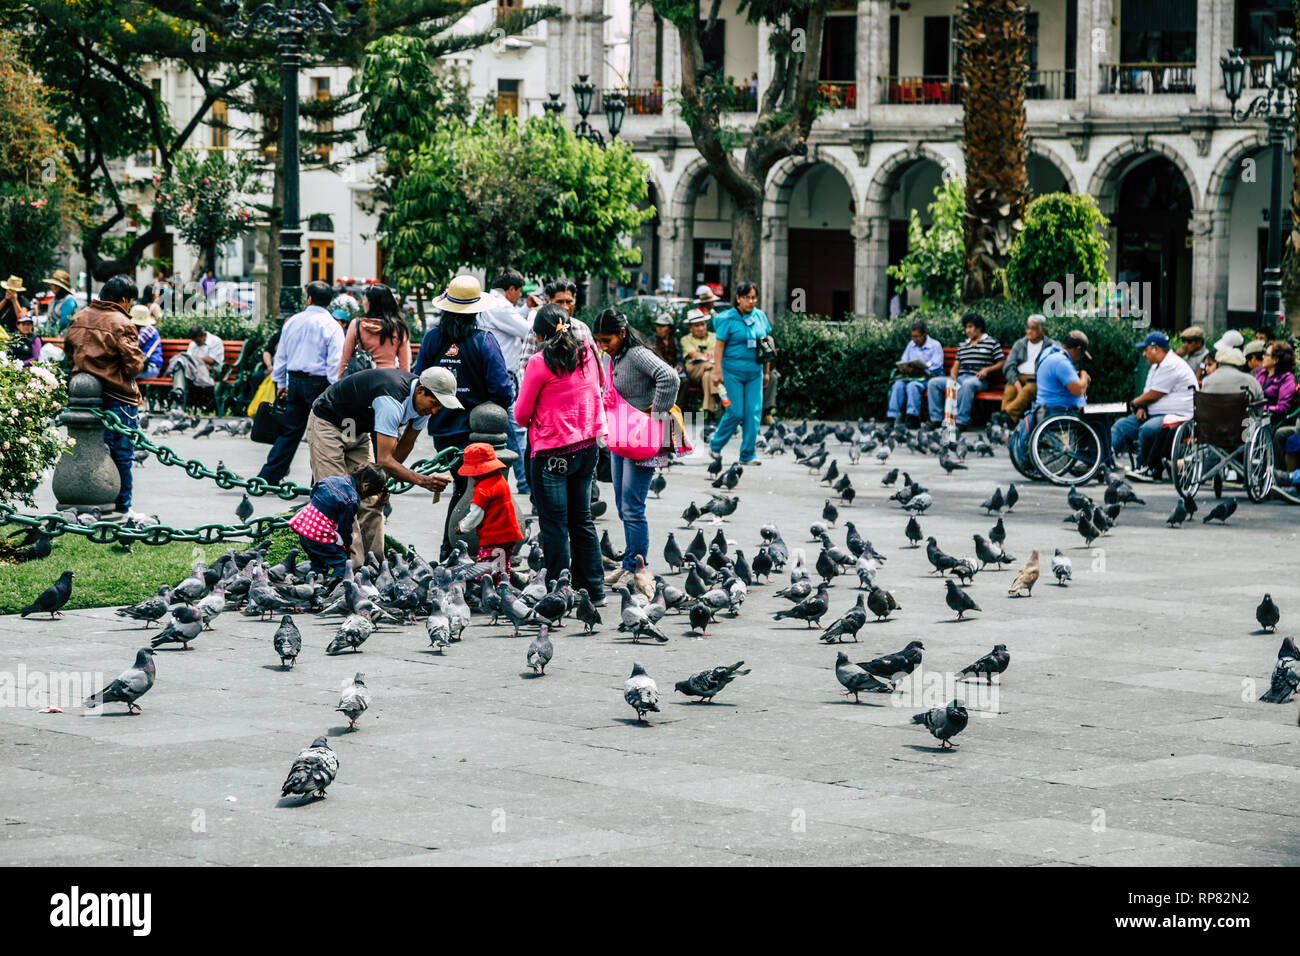 Street scene from the central park of Arequipa (Peru). A family with kids feeding pigeons, people in wheelchairs in the background. Stock Photo